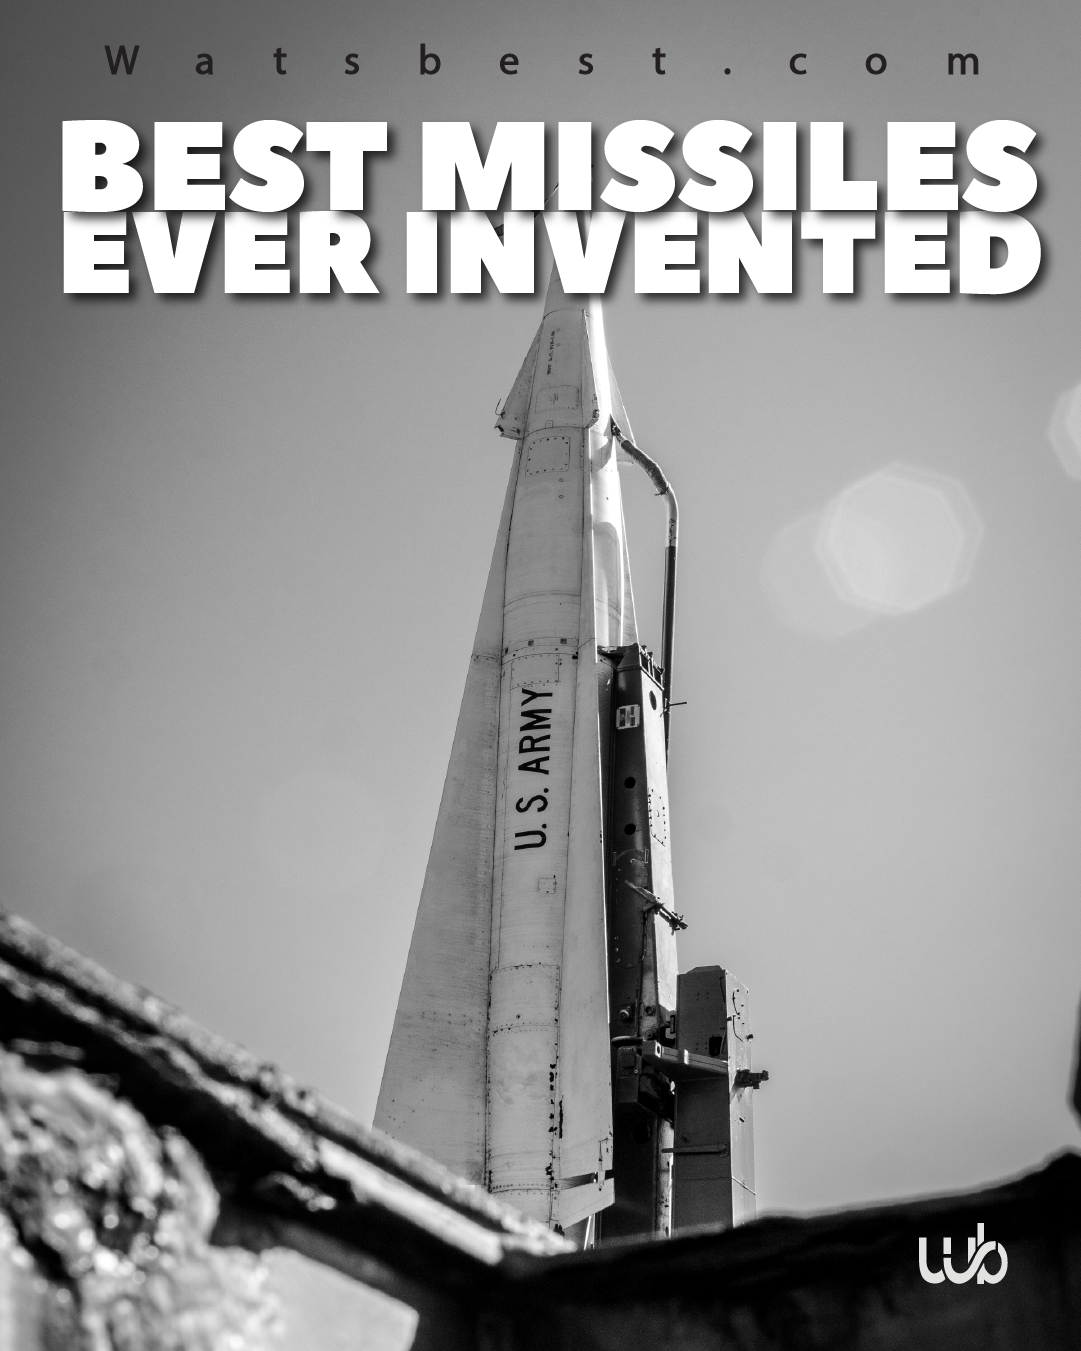 THE BEST MISSILES INVENTED